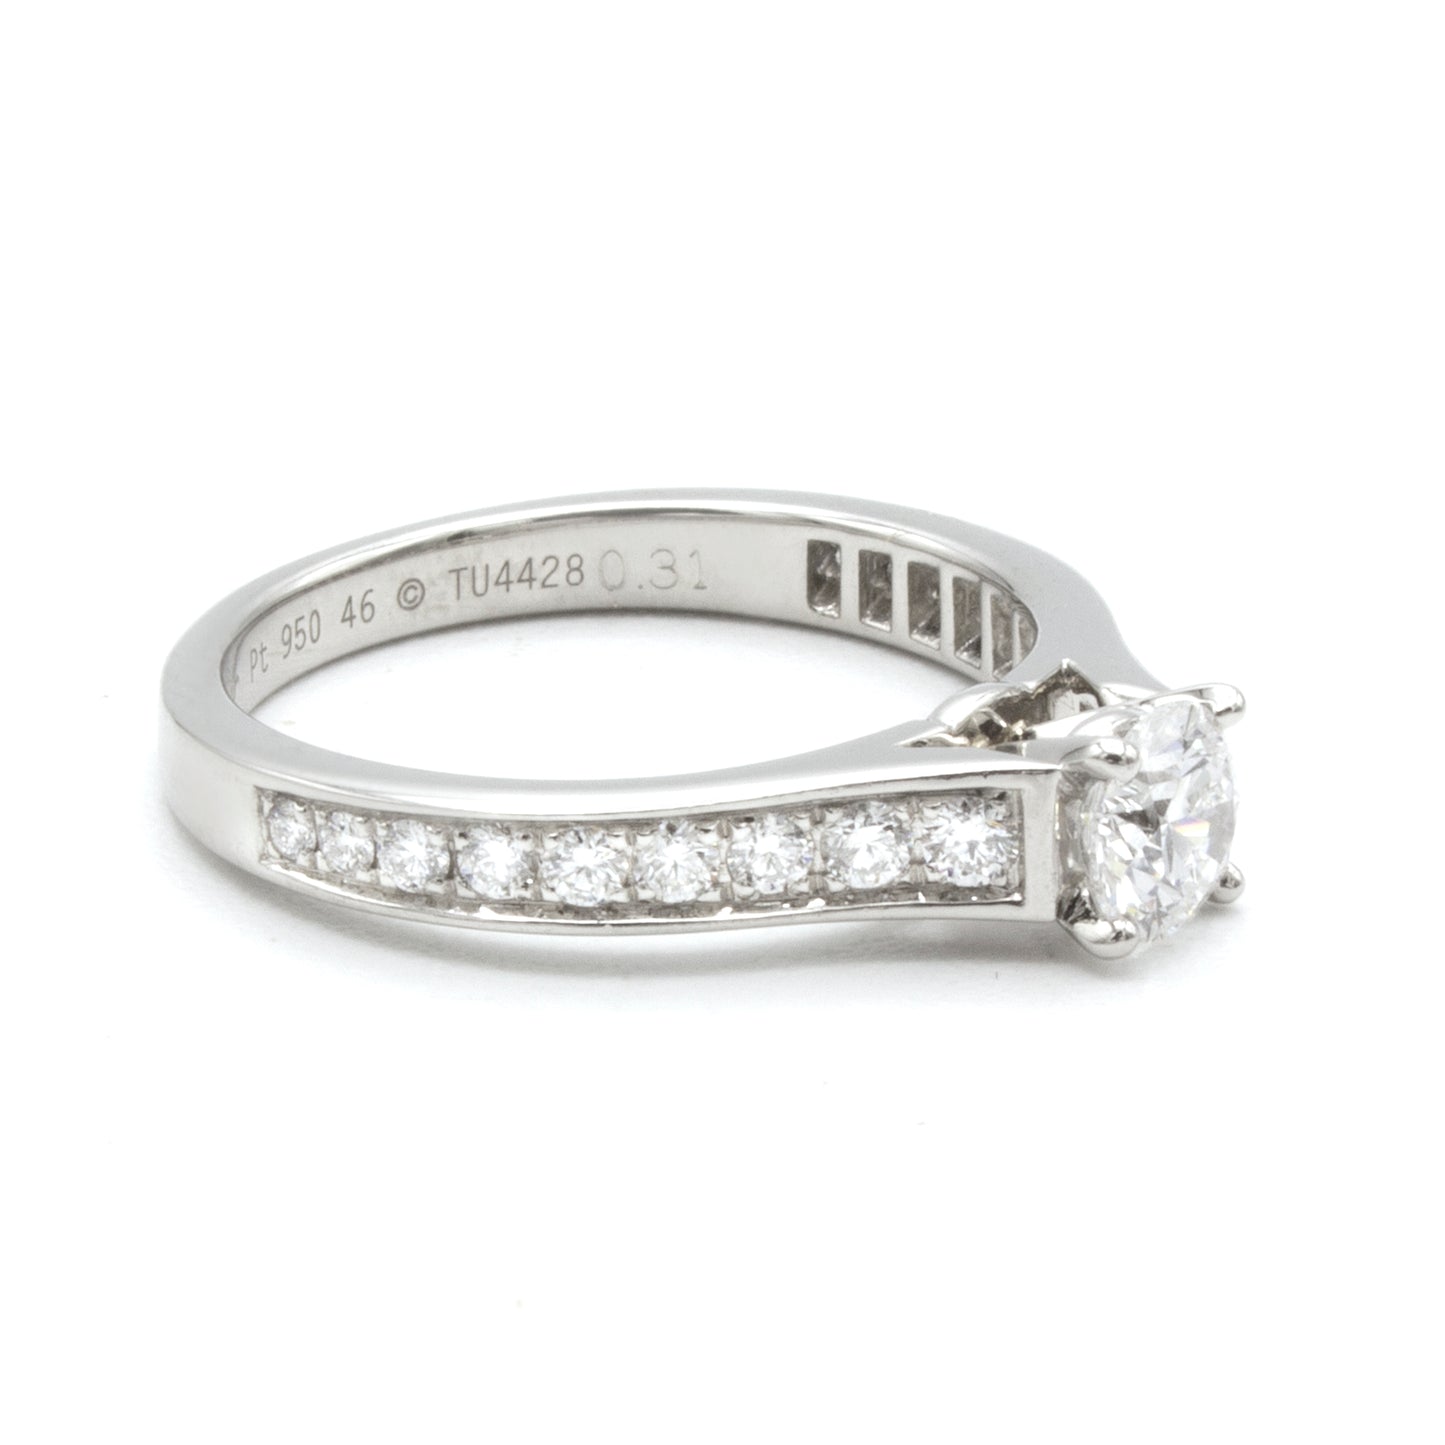 Cartier Solitaire 1895 ring